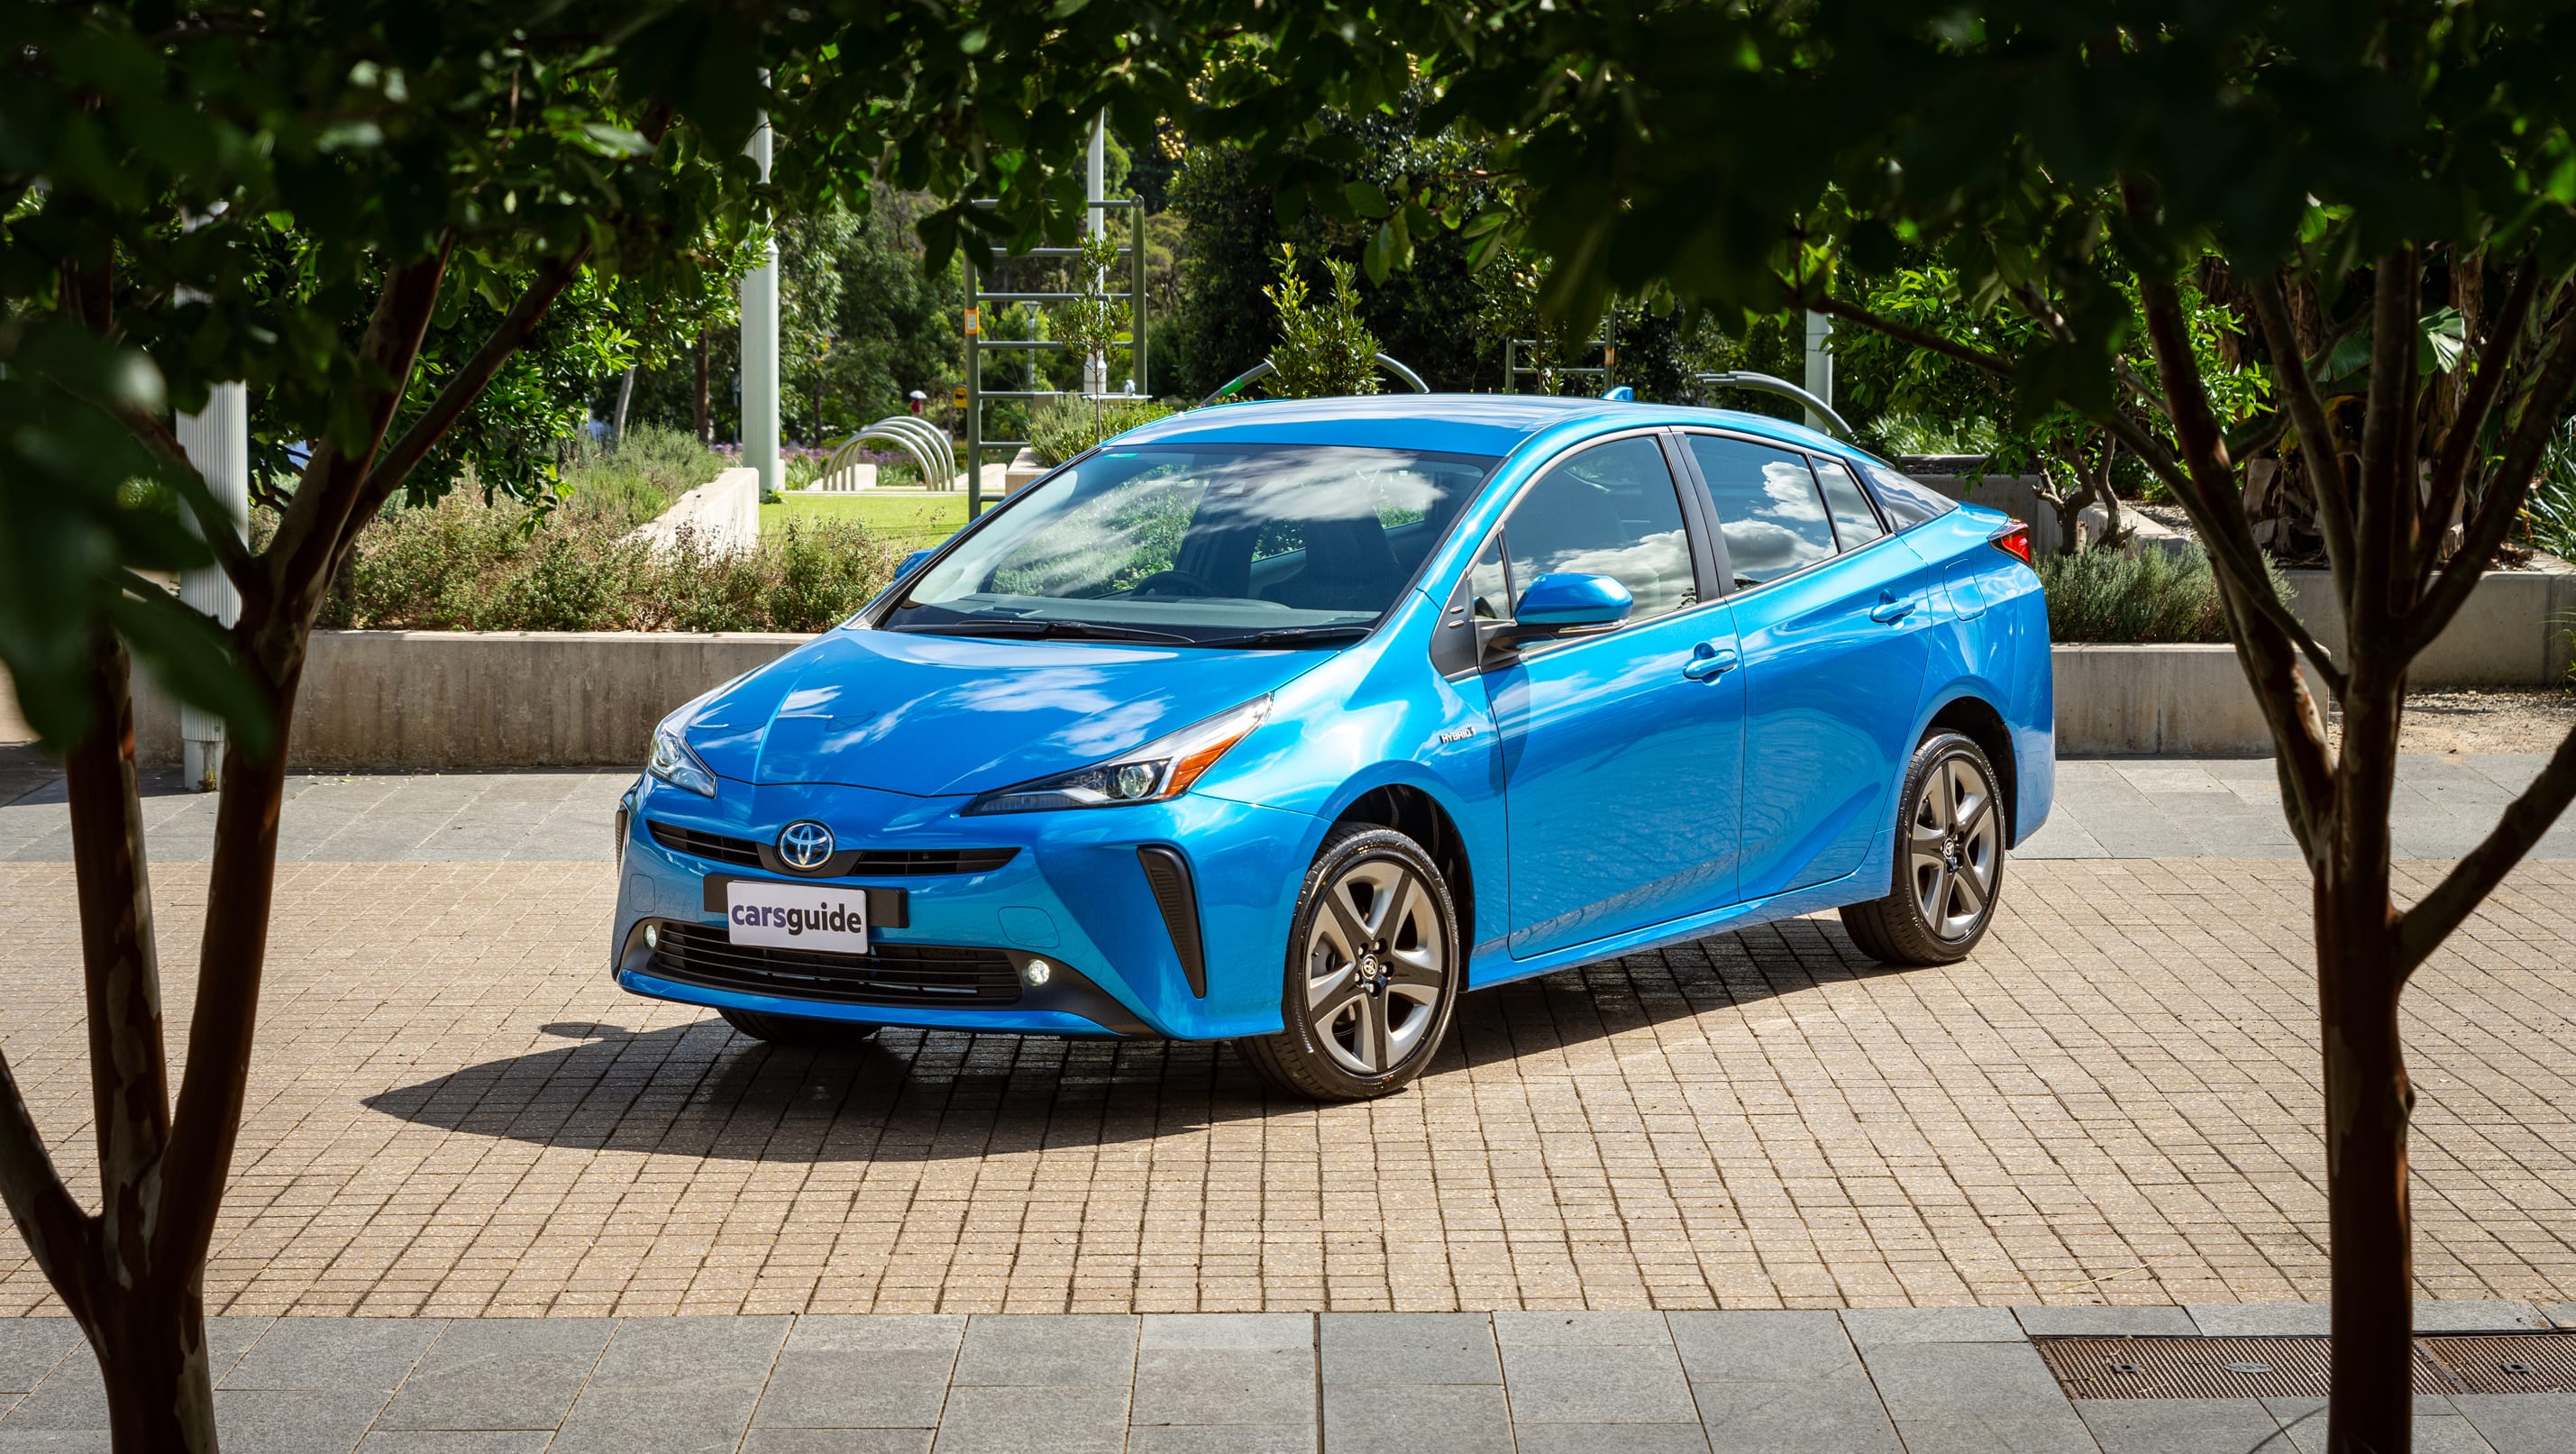 Toyota Prius Hybrid 2021 Review: I-Tech – The Best Thing This Side Of An Electric Car In 2021? | Carsguide